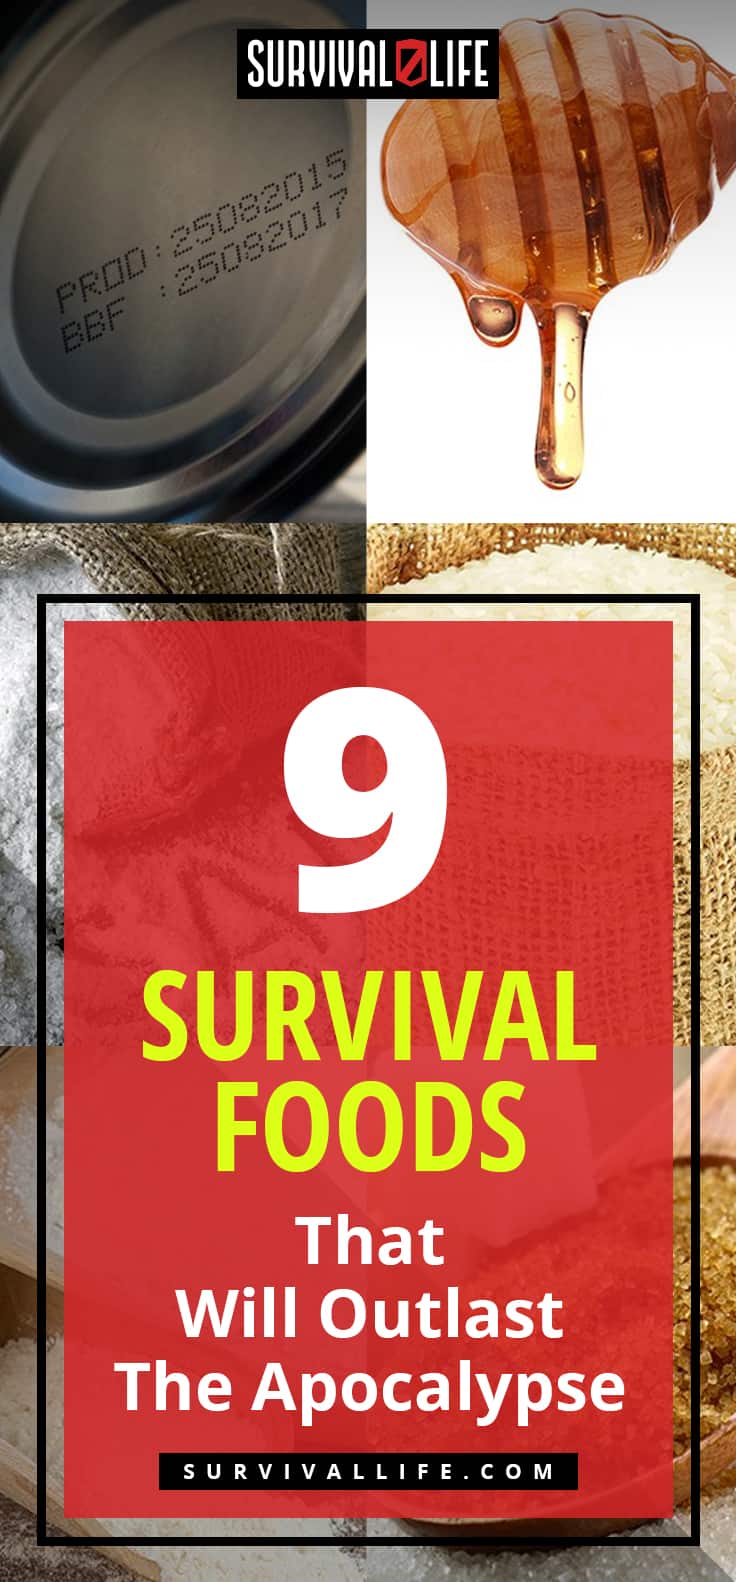  Survival Food Items That Will Outlast The Apocalypse | https://survivallife.com/survival-food-outlast-apocalypse/